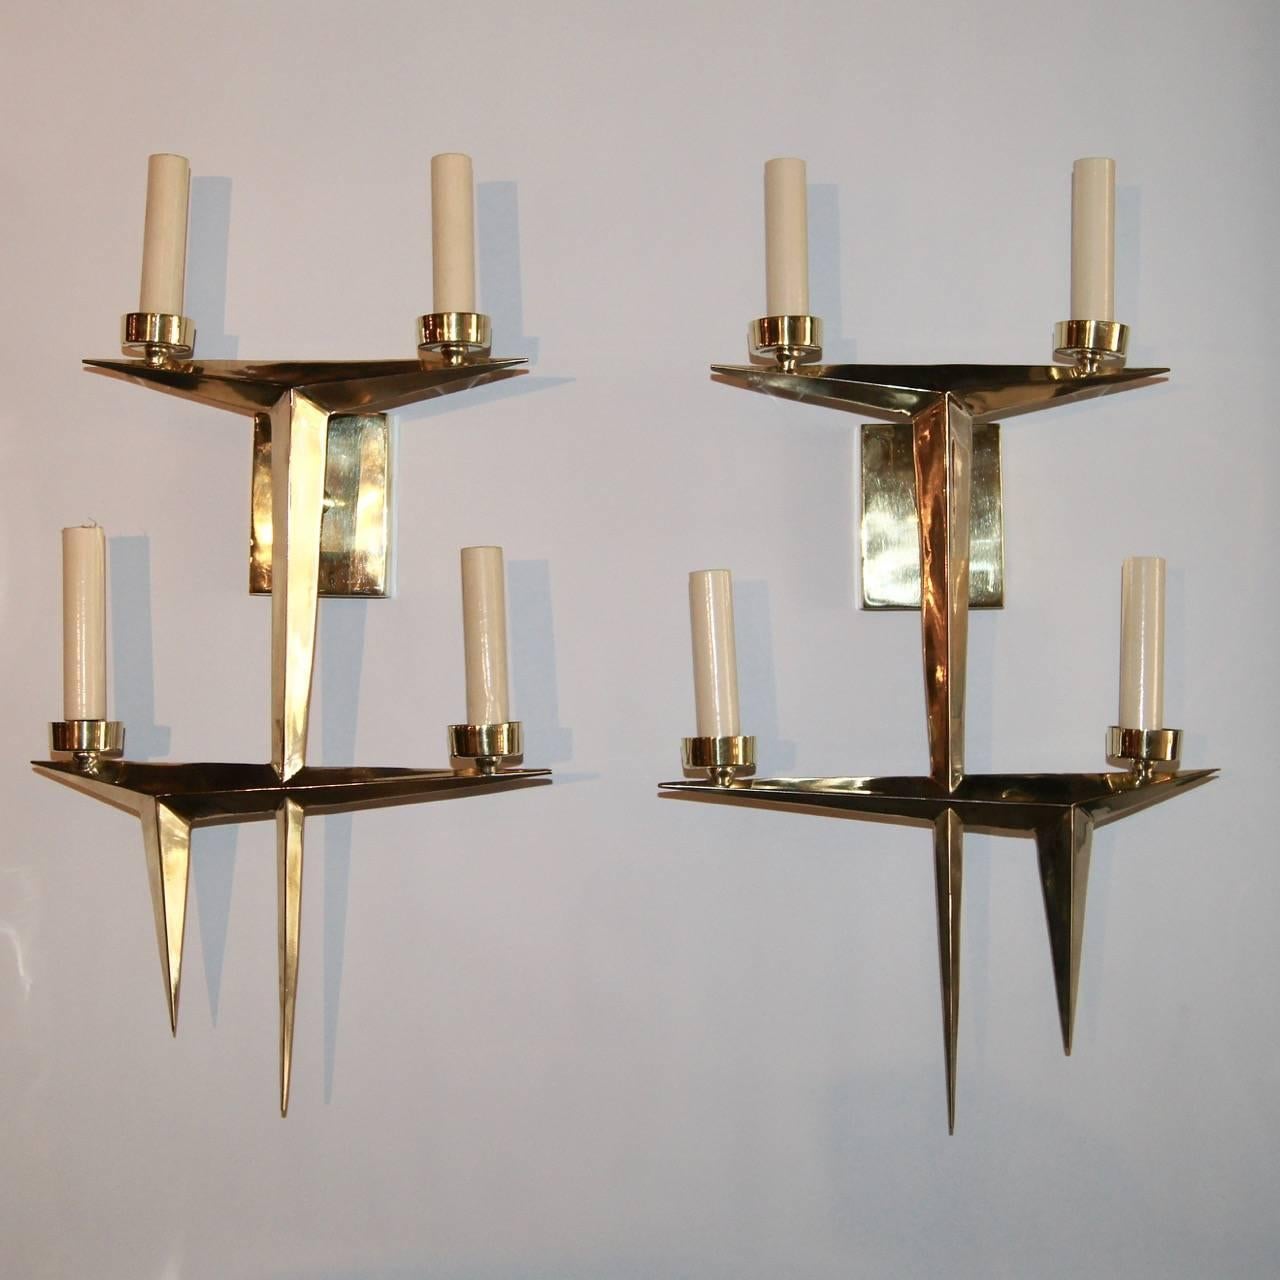 French moderne-style four-light sconces, polished bronze finish, circa 1950.

Measurements:
Height 21